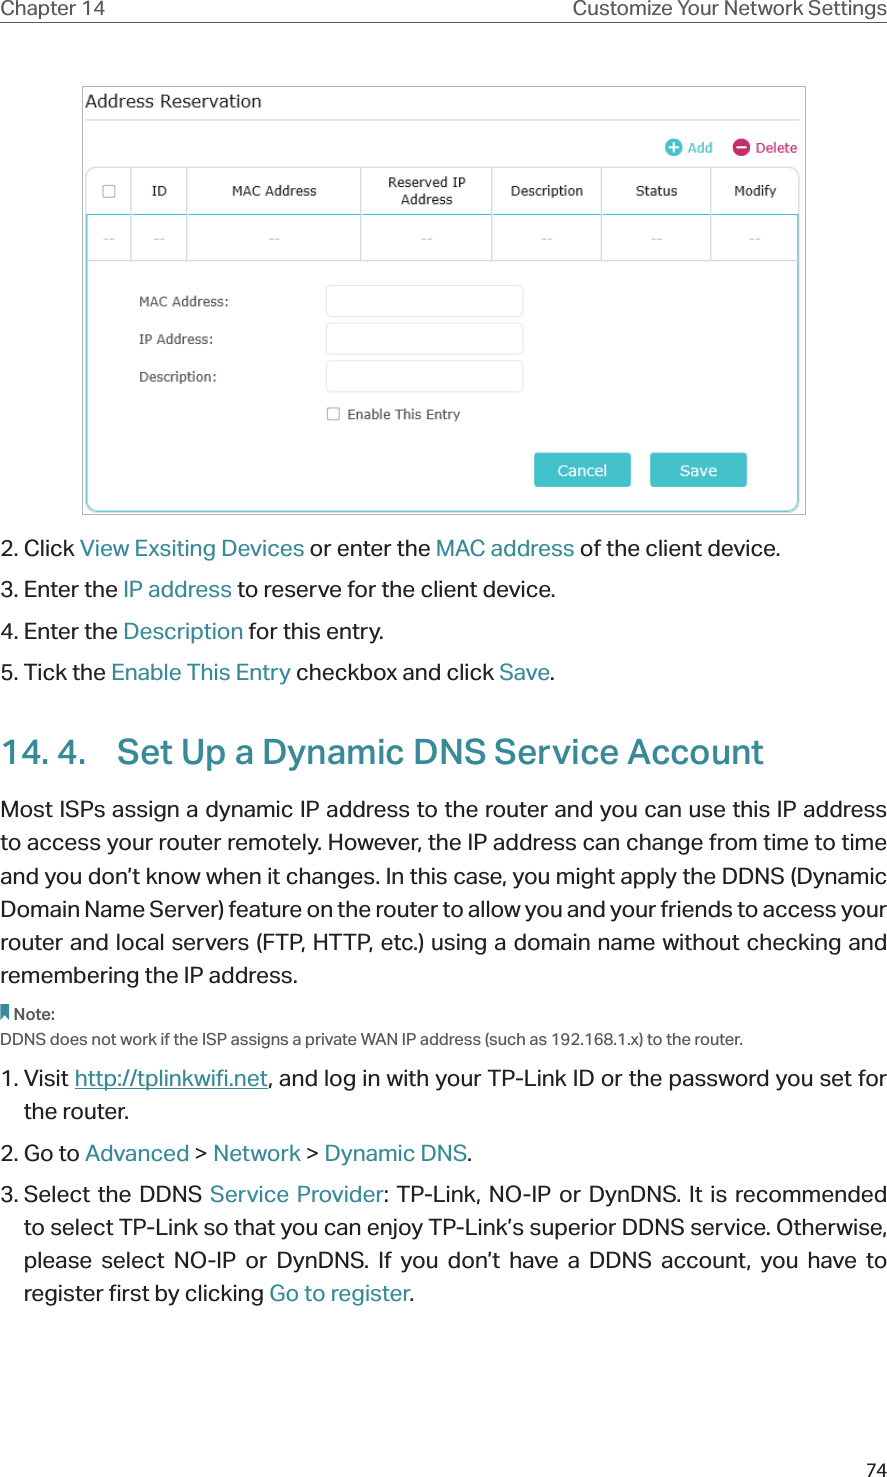 74Chapter 14 Customize Your Network Settings2. Click View Exsiting Devices or enter the MAC address of the client device.3. Enter the IP address to reserve for the client device.4. Enter the Description for this entry.5. Tick the Enable This Entry checkbox and click Save. 14. 4.  Set Up a Dynamic DNS Service AccountMost ISPs assign a dynamic IP address to the router and you can use this IP address to access your router remotely. However, the IP address can change from time to time and you don’t know when it changes. In this case, you might apply the DDNS (Dynamic Domain Name Server) feature on the router to allow you and your friends to access your router and local servers (FTP, HTTP, etc.) using a domain name without checking and remembering the IP address. Note: DDNS does not work if the ISP assigns a private WAN IP address (such as 192.168.1.x) to the router. 1. Visit http://tplinkwifi.net, and log in with your TP-Link ID or the password you set for the router.2. Go to Advanced &gt; Network &gt; Dynamic DNS.3. Select  the  DDNS  Service Provider: TP-Link, NO-IP or DynDNS. It is recommended to select TP-Link so that you can enjoy TP-Link’s superior DDNS service. Otherwise, please select NO-IP or DynDNS. If you don’t have a DDNS account, you have to  register first by clicking Go to register.